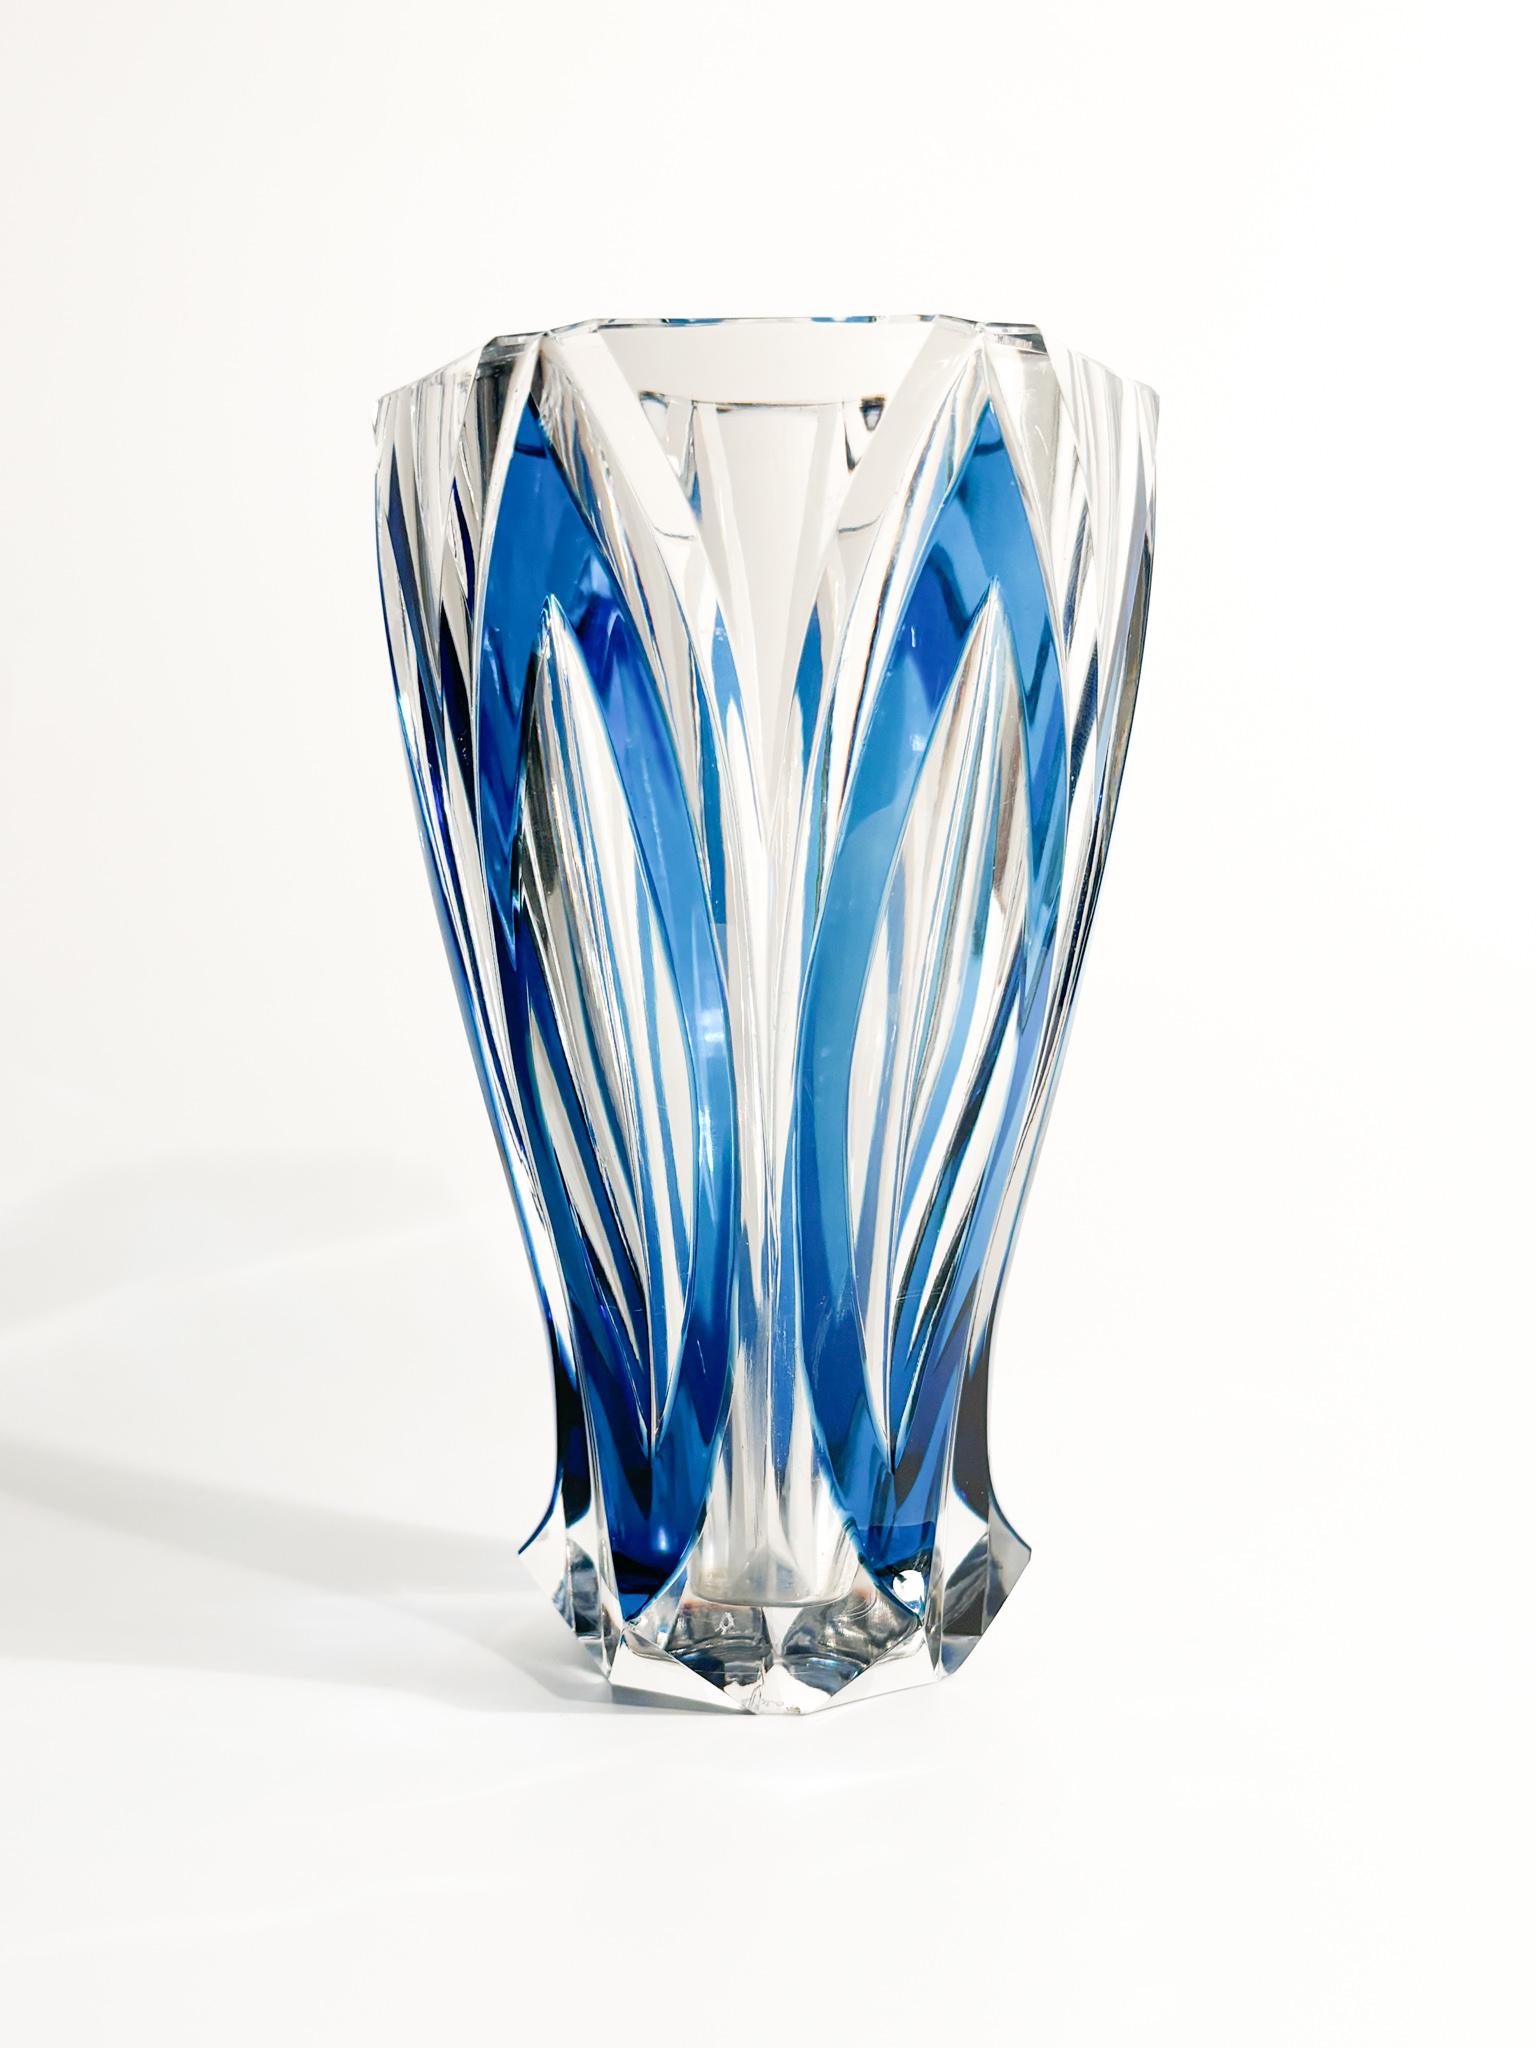 Saint-Louis Blue French Crystal Vase from the 1940s For Sale 5